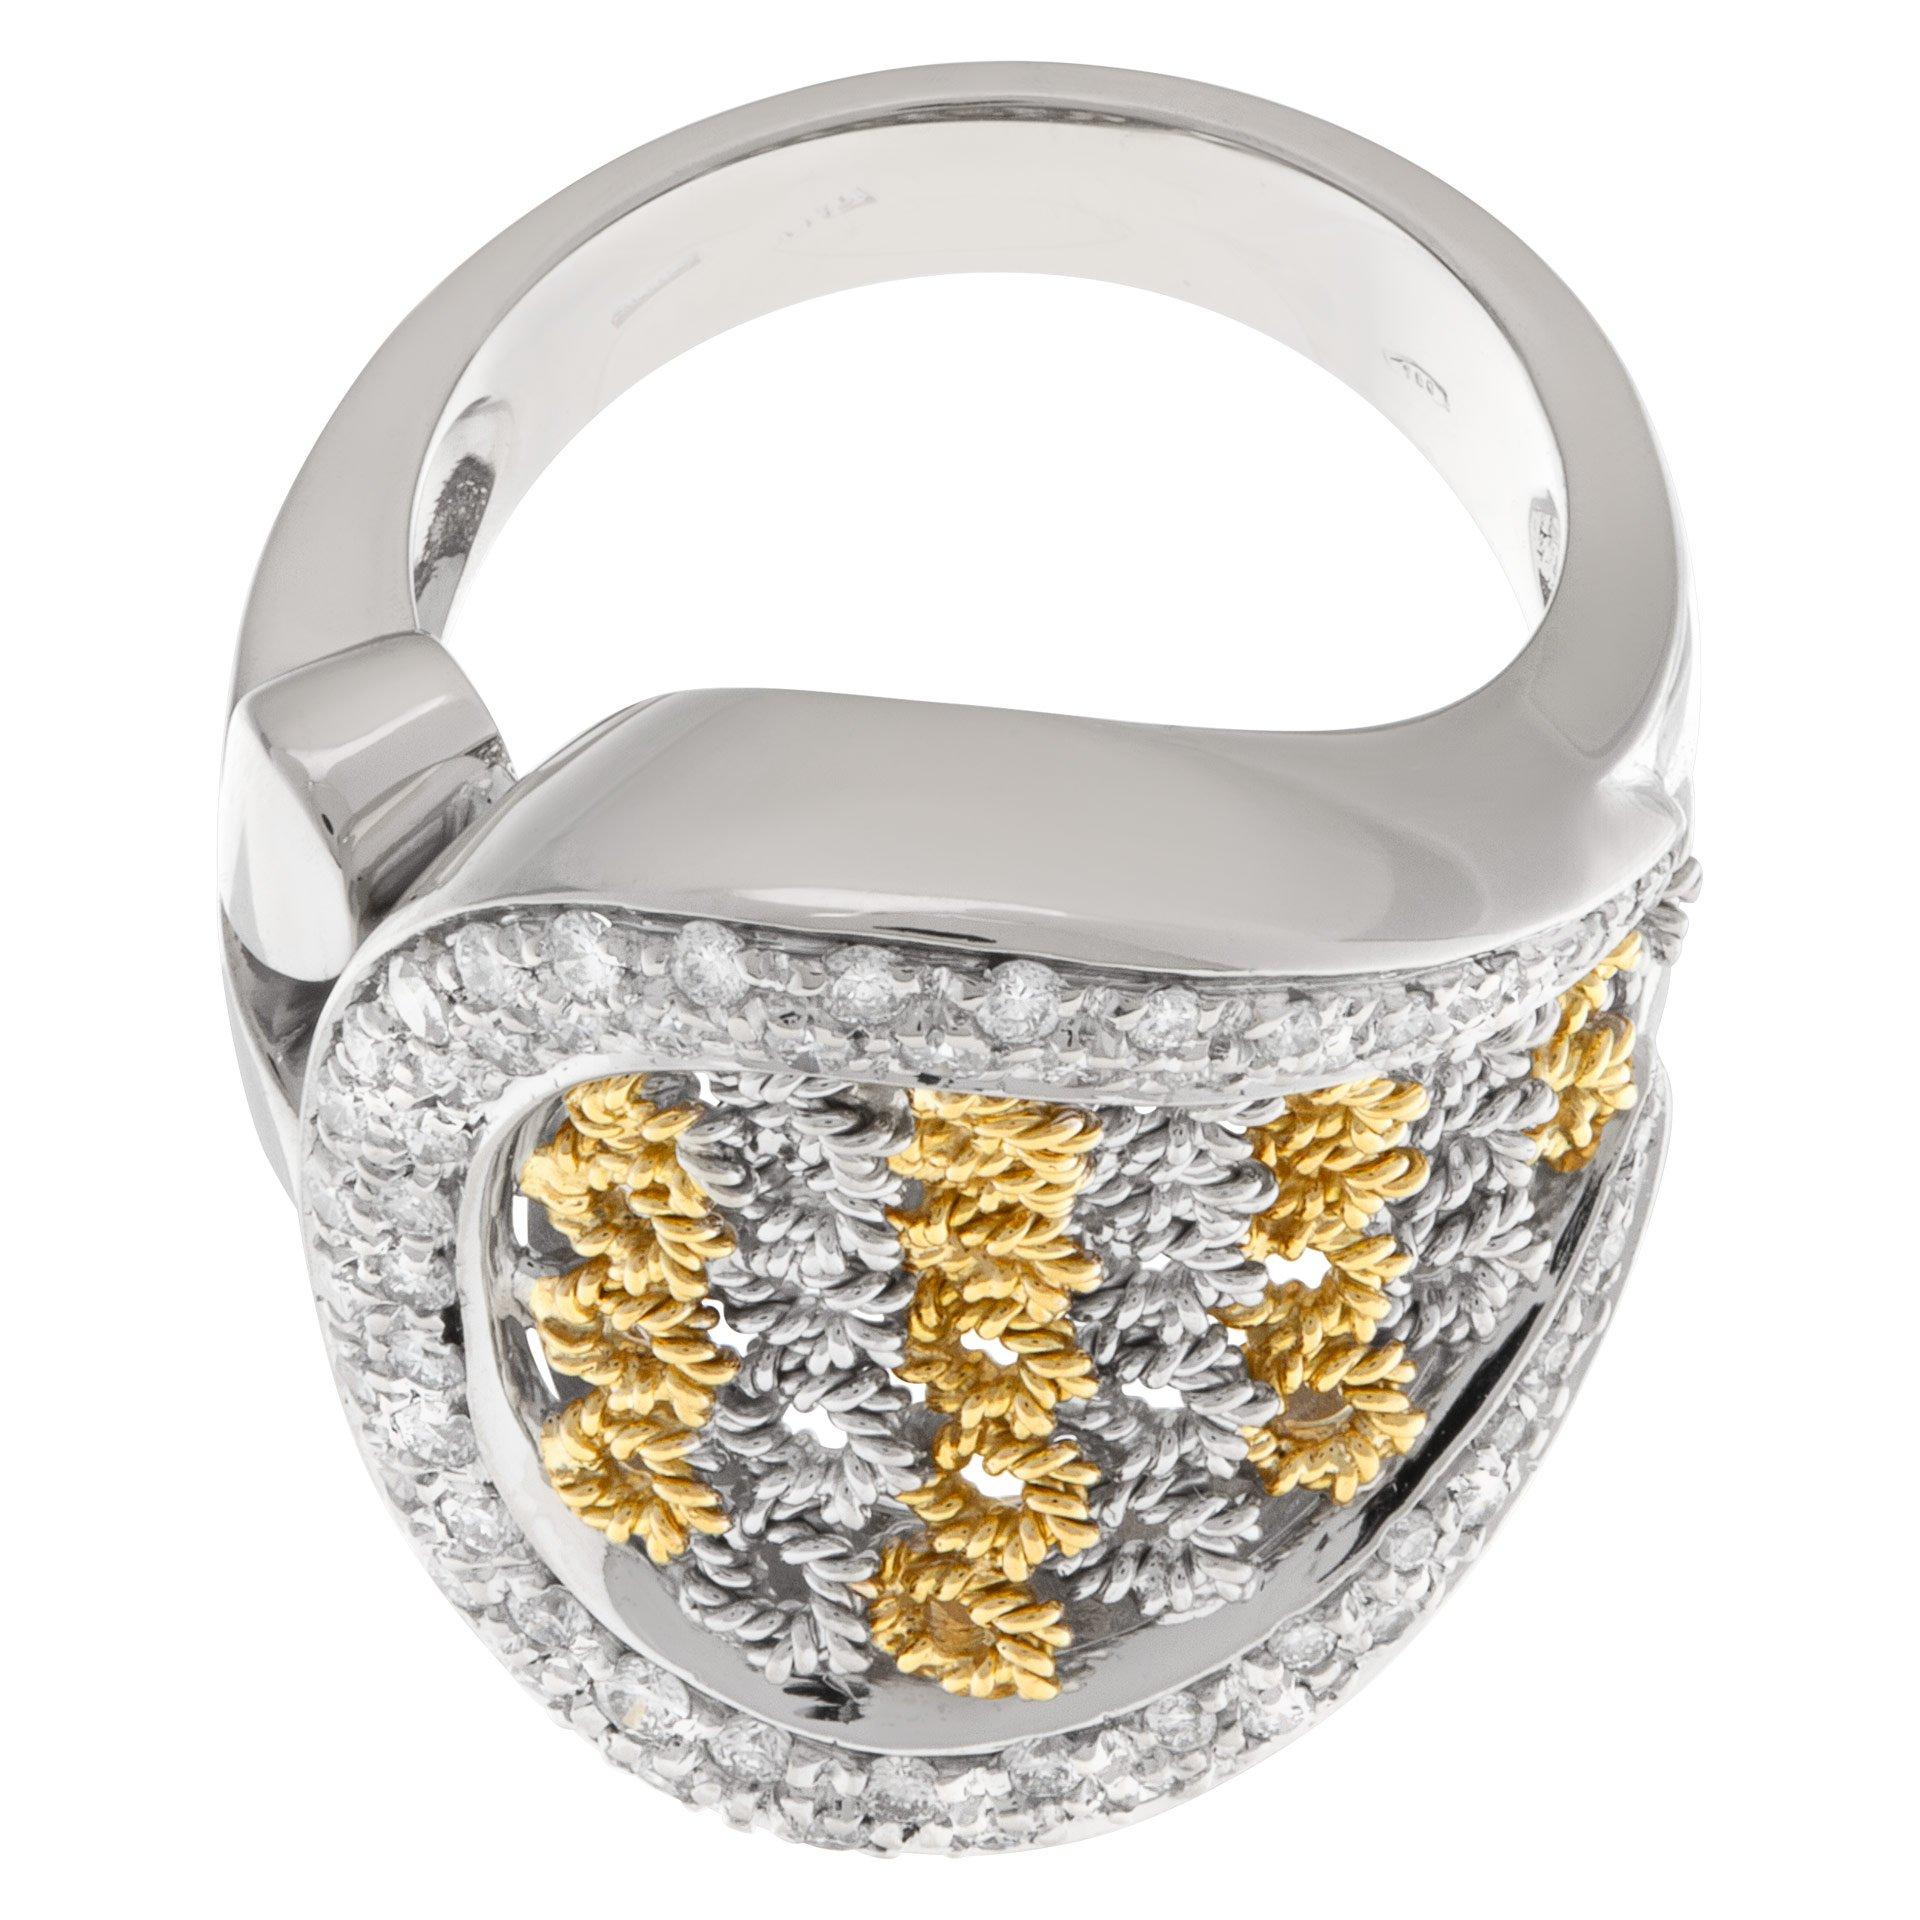 Basket Weave Ring with Surrounding Pave Diamonds in 18k White and Yellow Gold In Excellent Condition For Sale In Surfside, FL